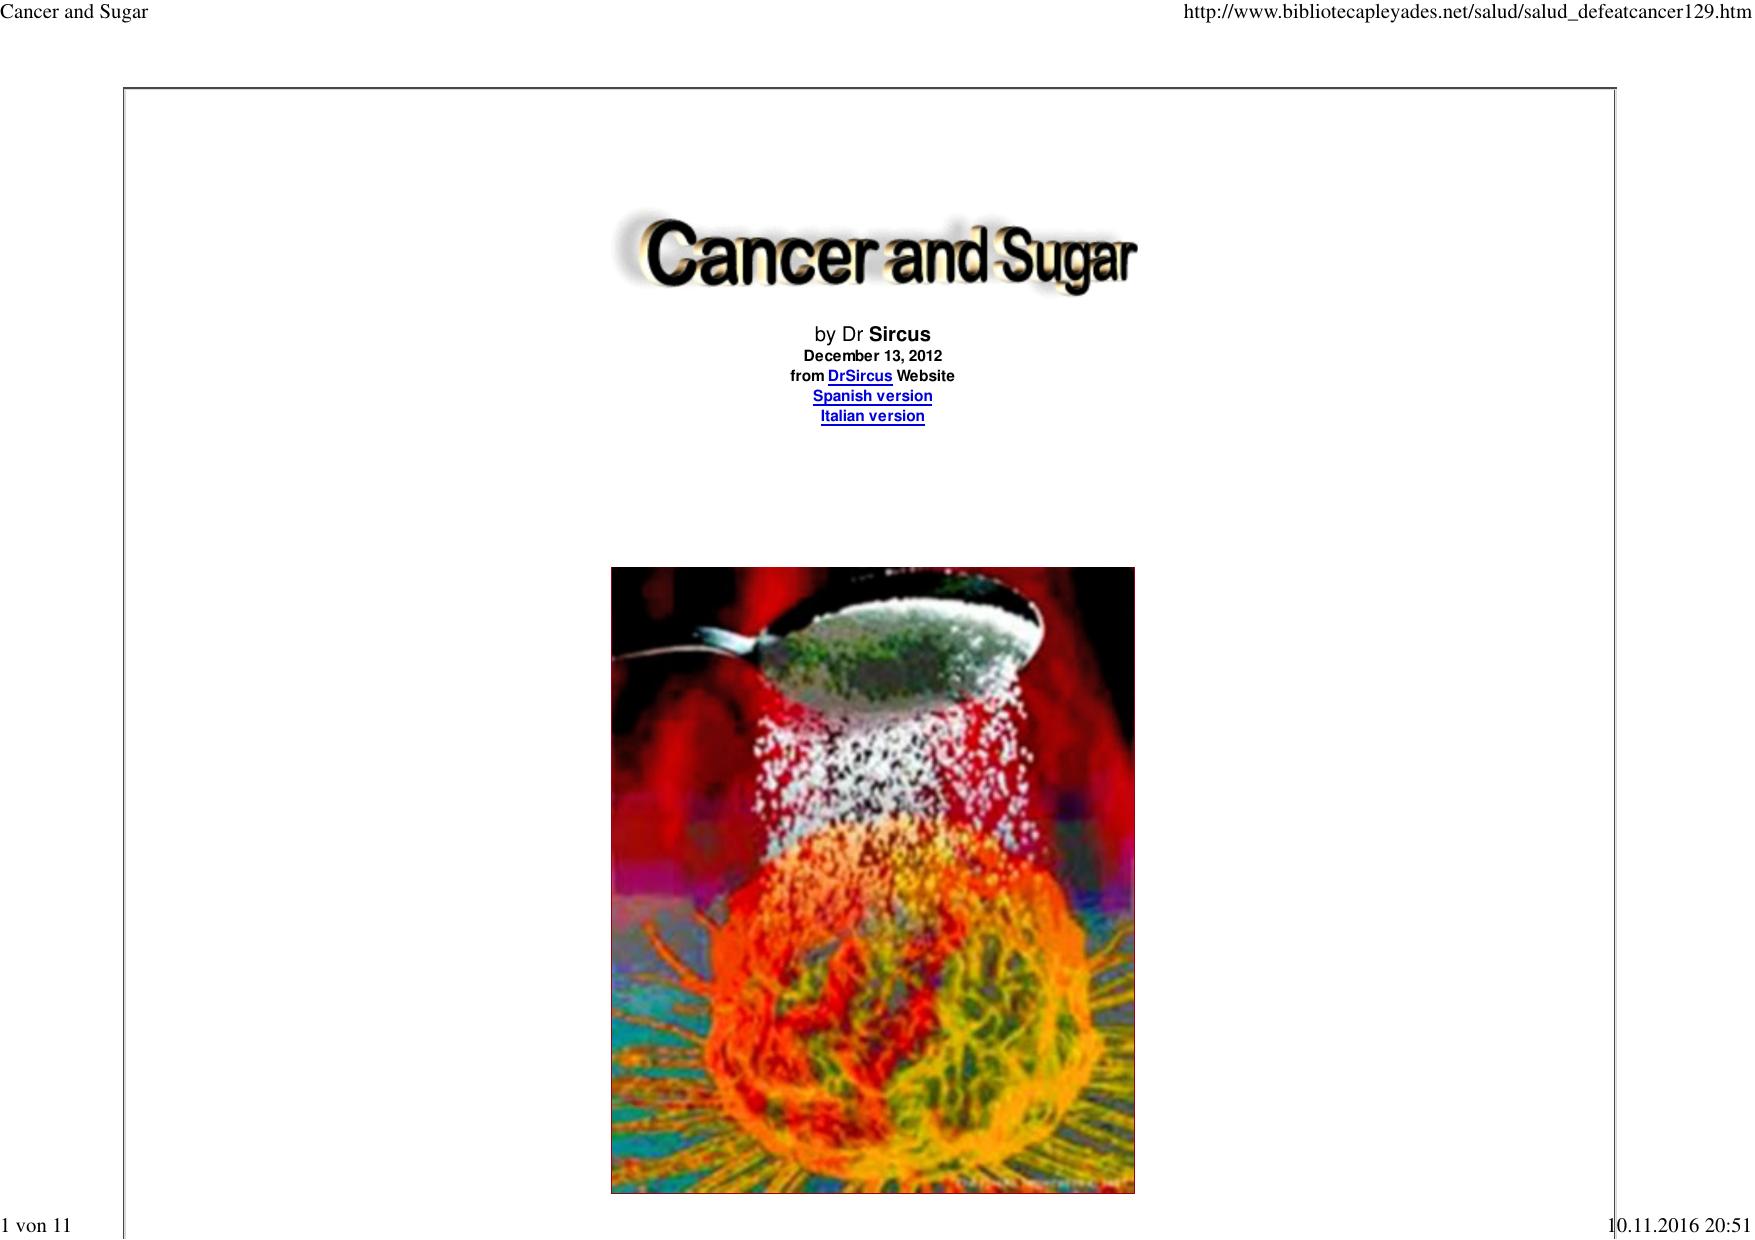 Cancer and Sugar by Gigabyte